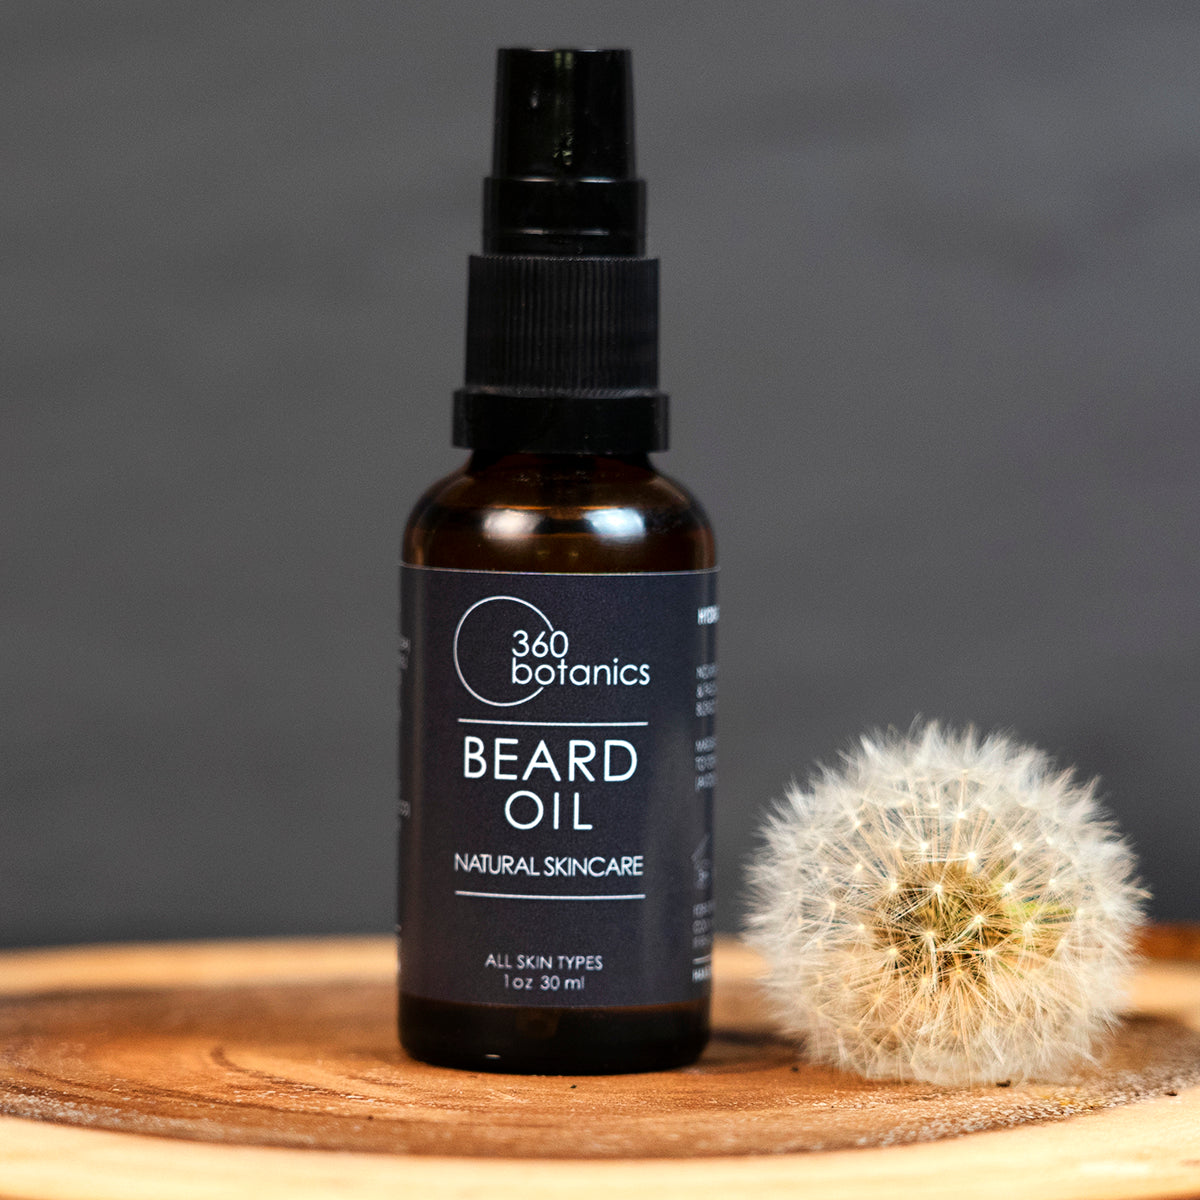 A bottle of 360 Botanics Beard Oil labeled for "All Skin Types" and "Natural Skincare" in a 1 oz 30 ml size with a spray nozzle, placed on a wooden surface next to a dandelion puff, against a blurred grey background